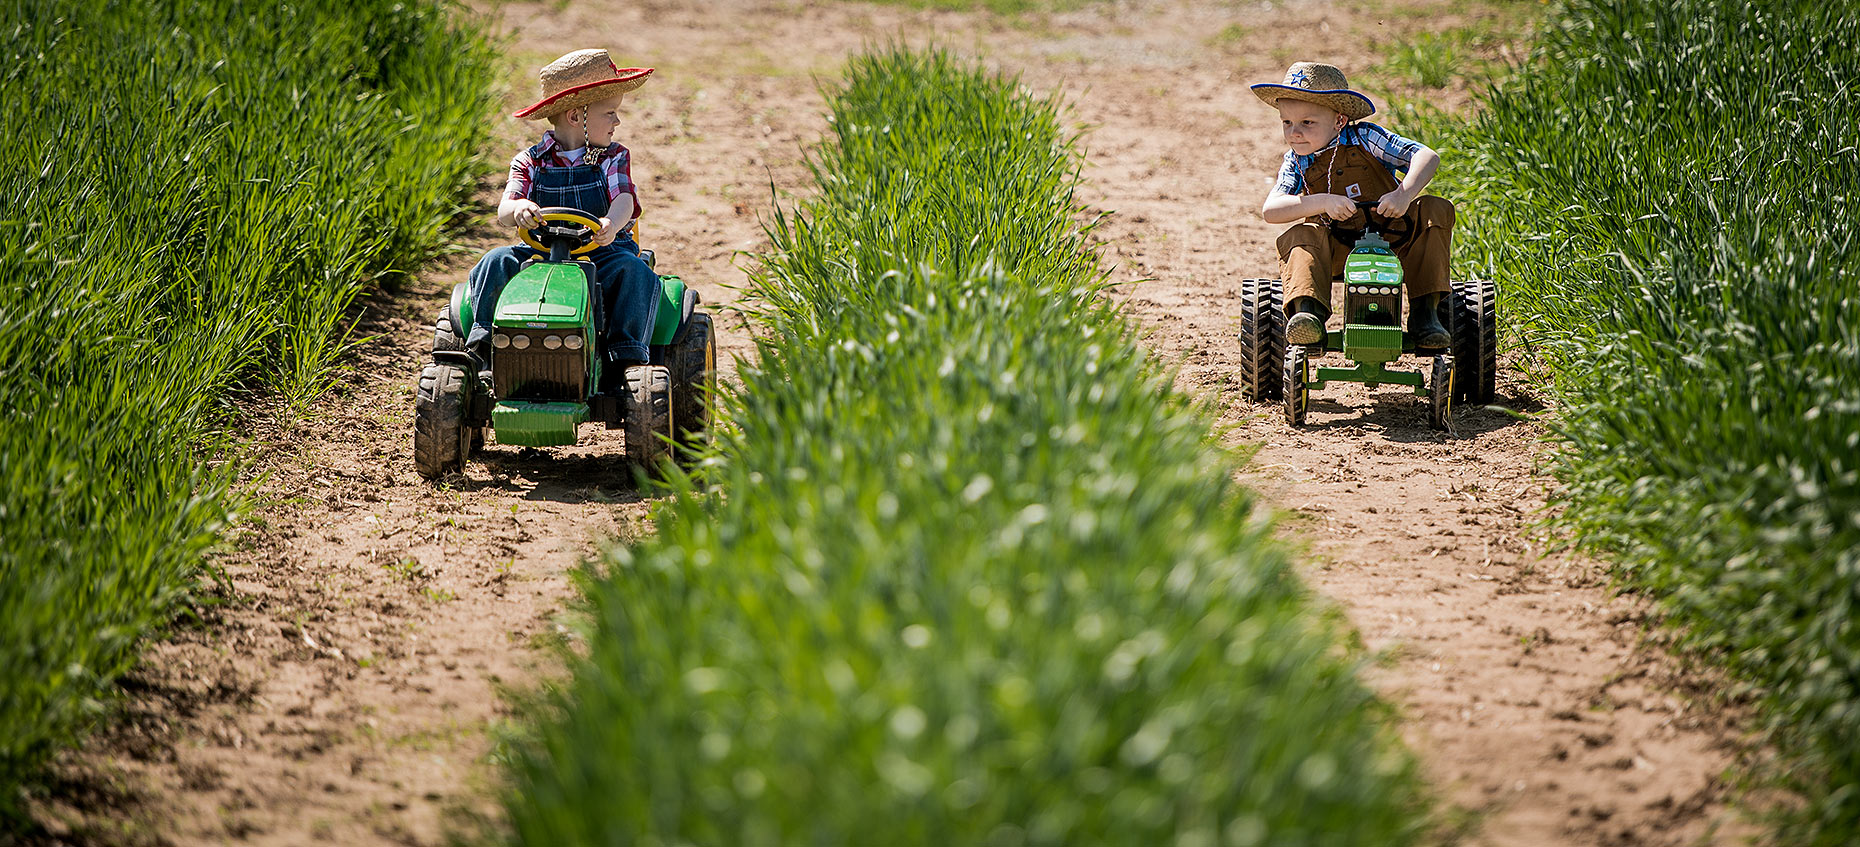 Kids Playing on Tractors Photo